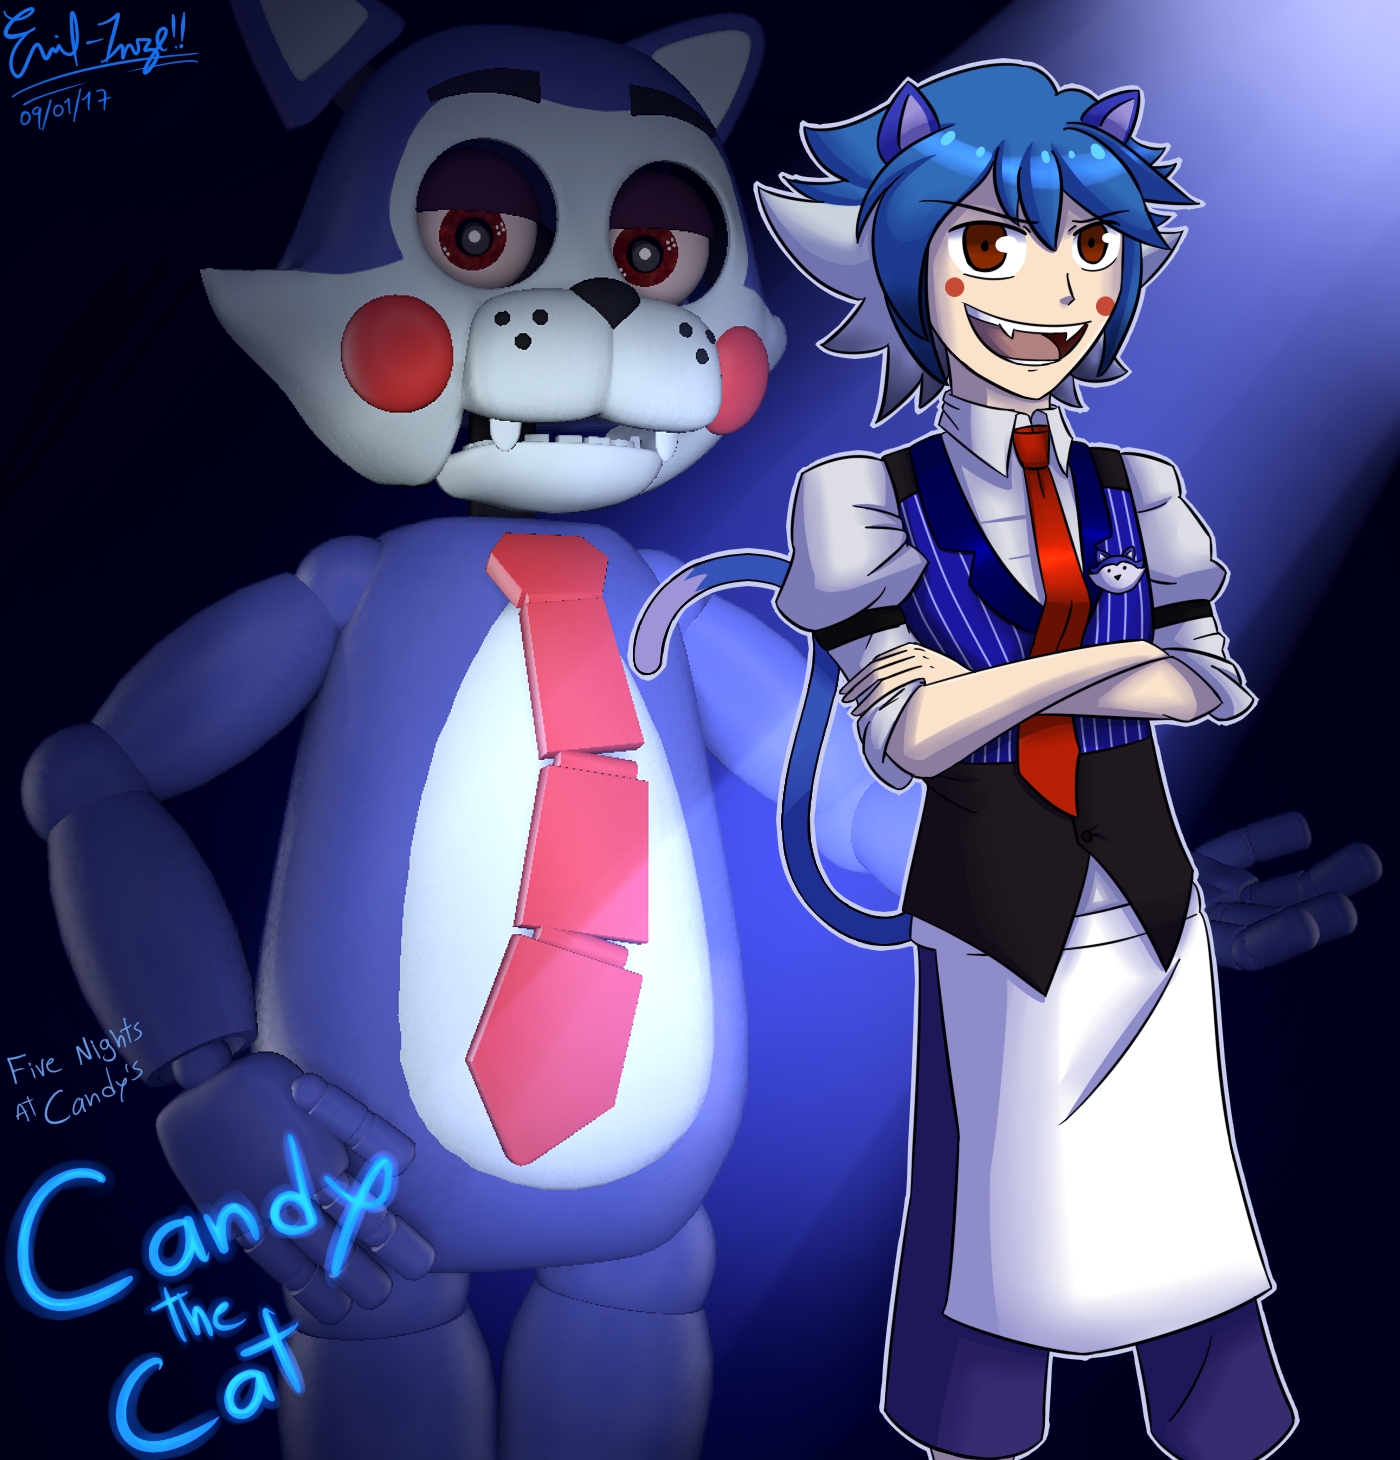 FNaC: Candy the Cat (Remastered) by Emil-Inze on DeviantArt